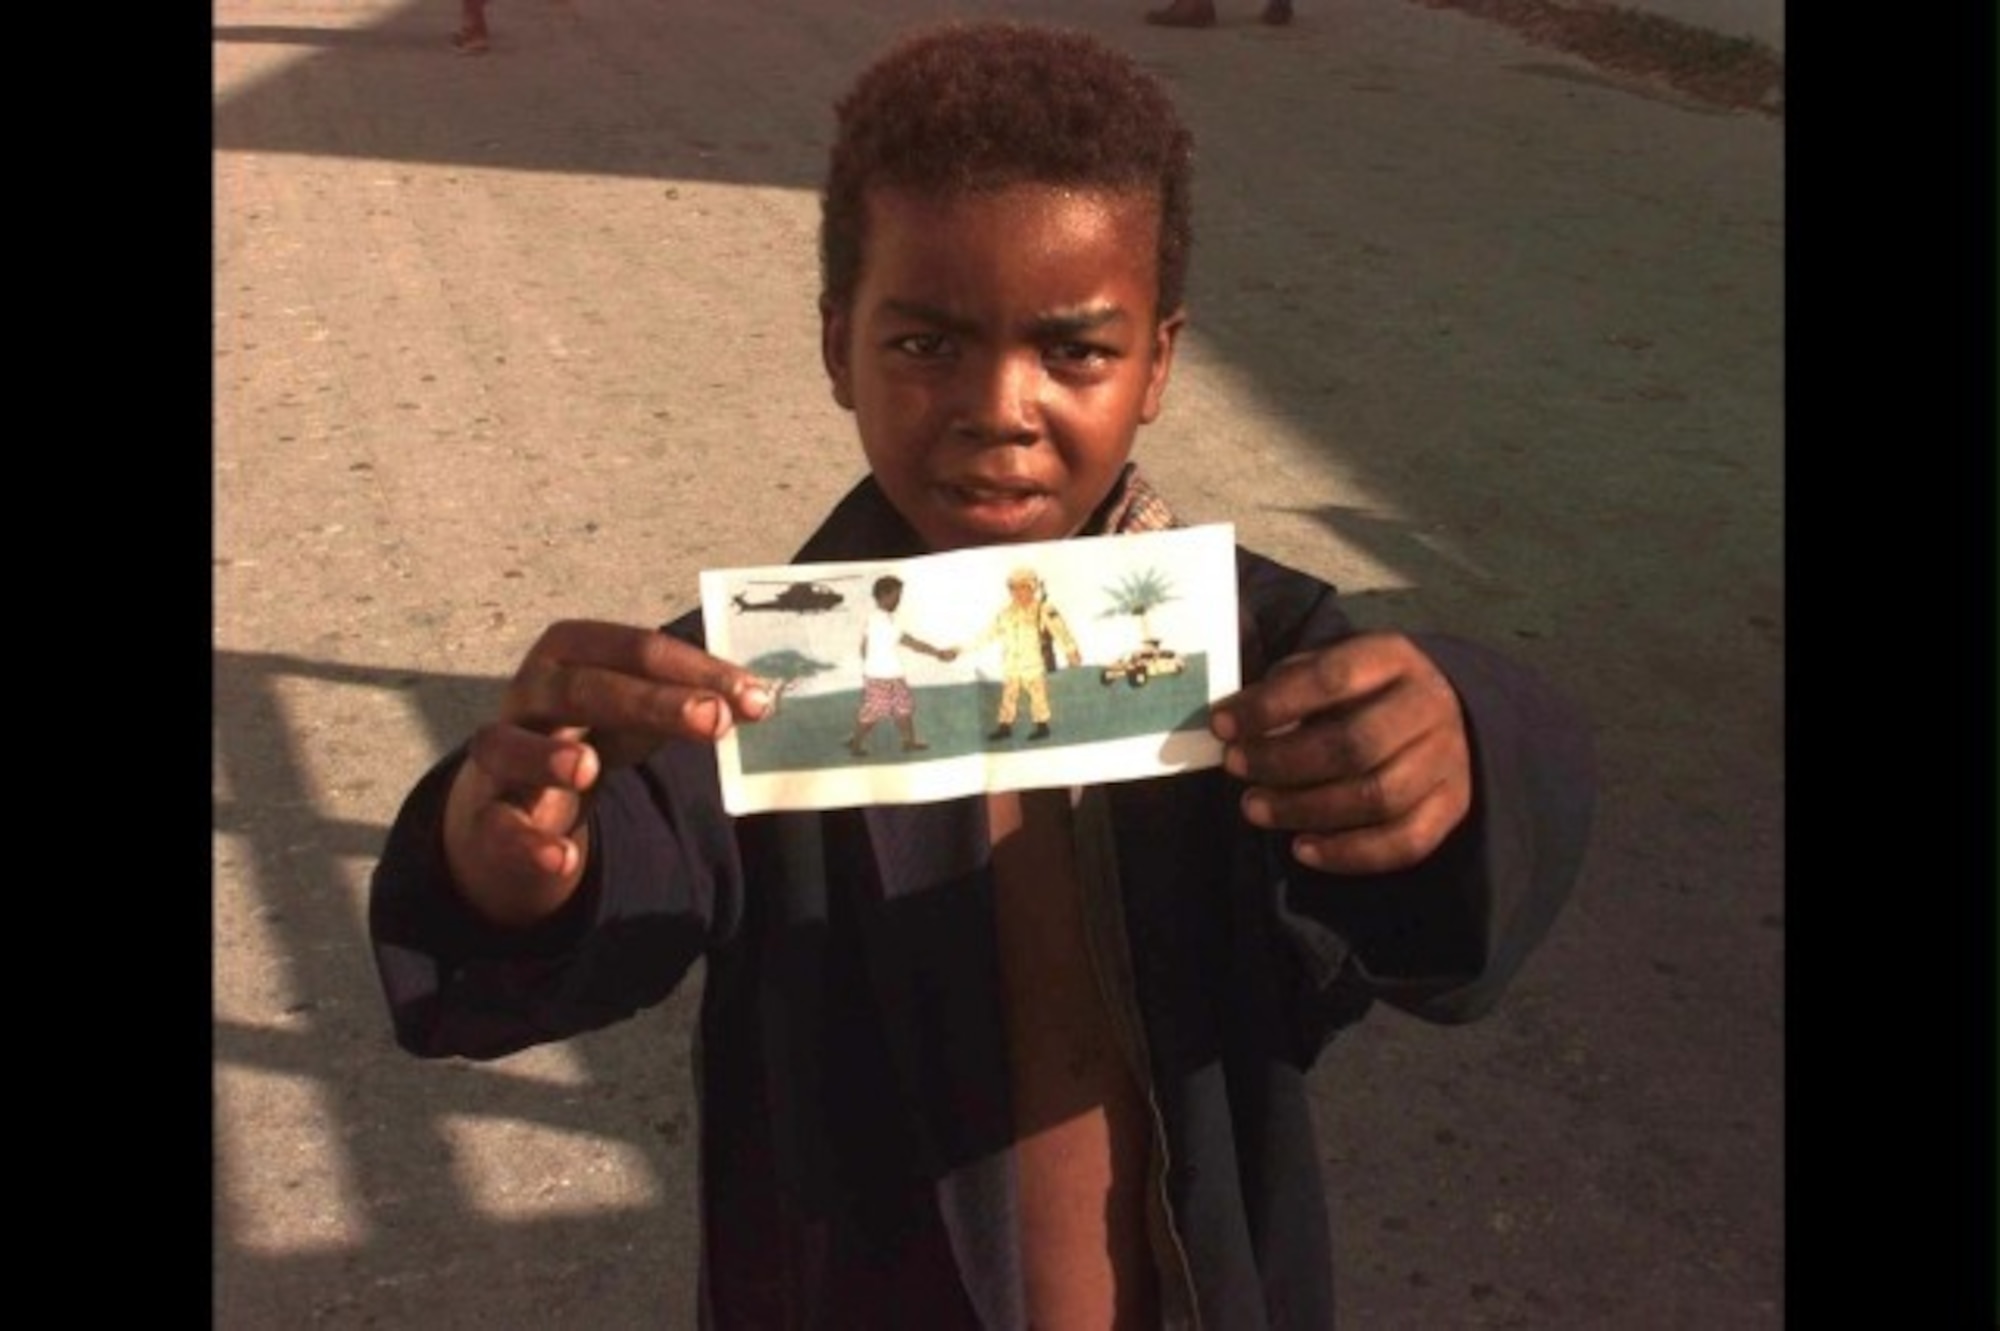 A Somali child holds the leaflet distributed during operation RESTORE HOPE. (U.S. Army photo)